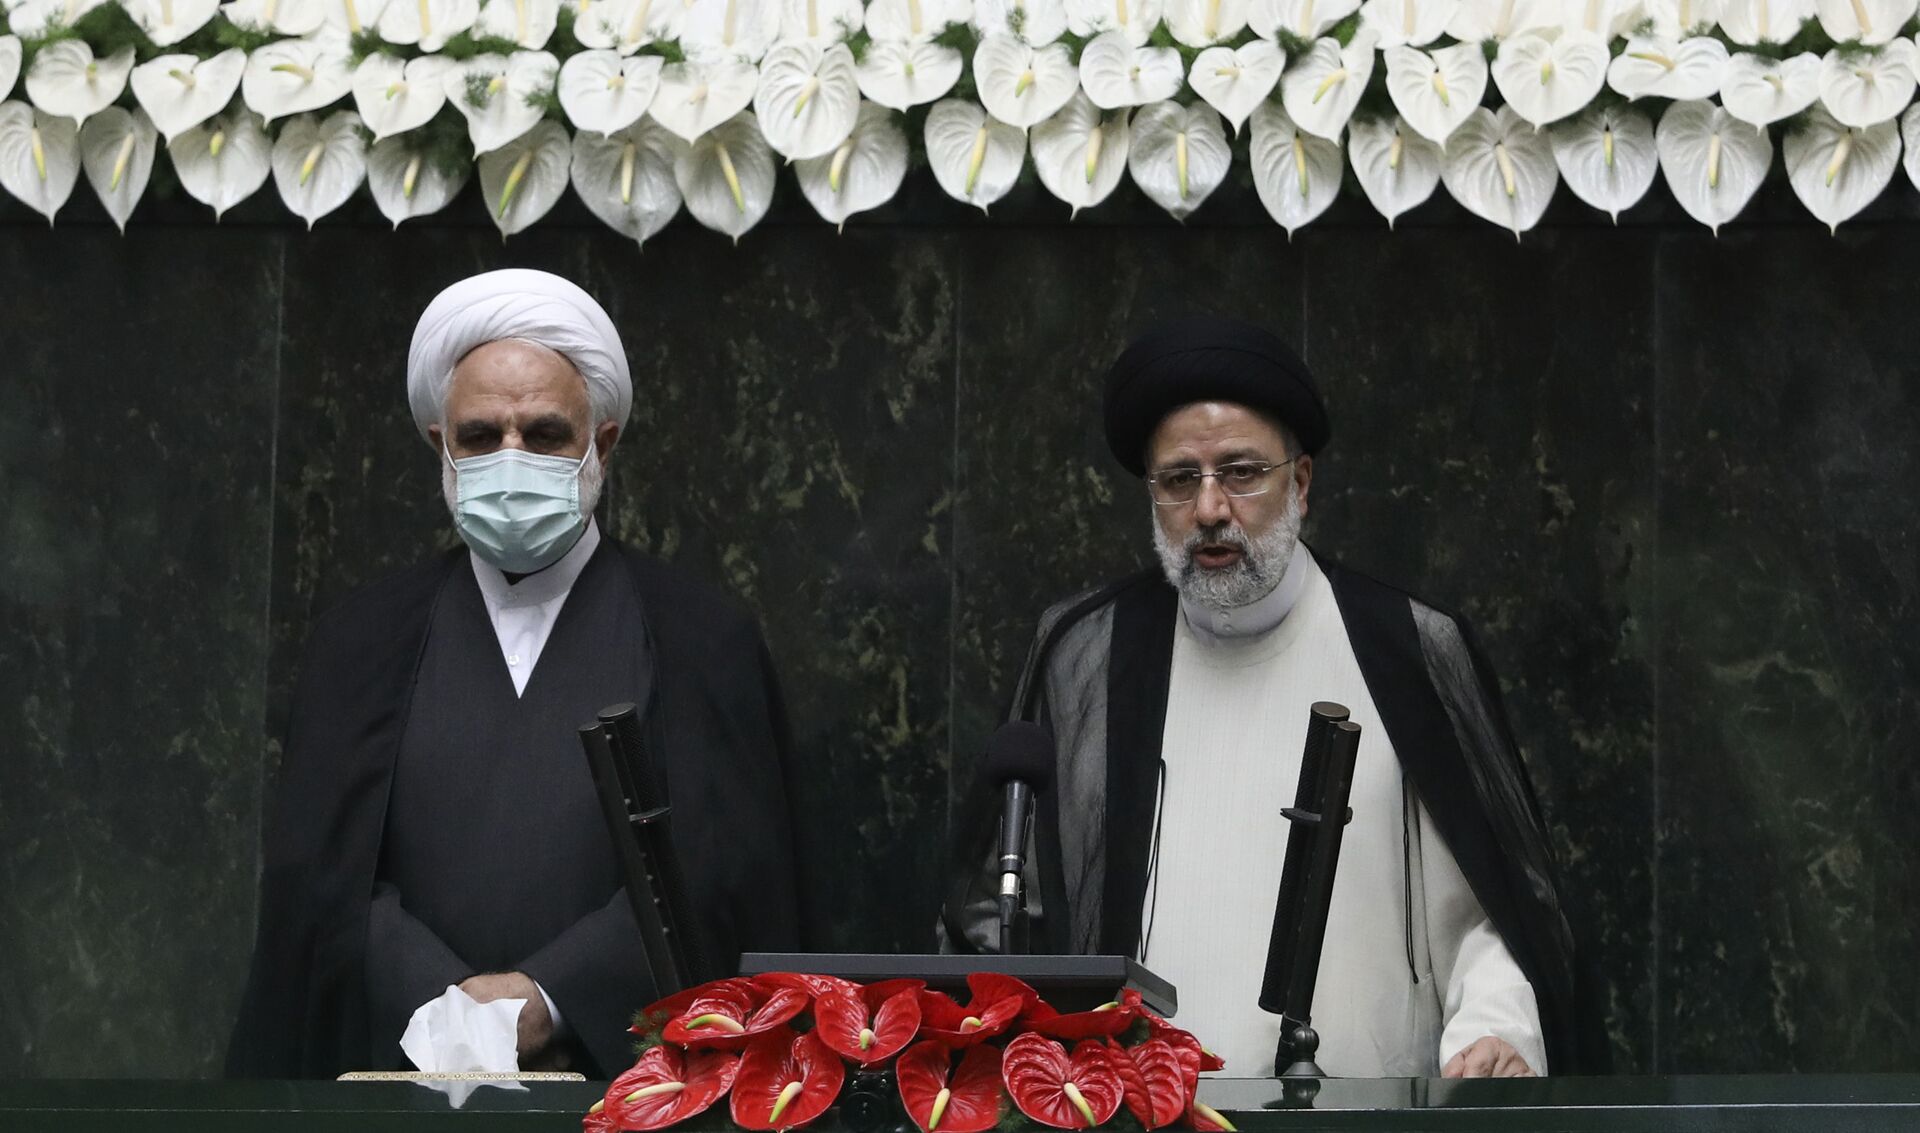 President Ebrahim Raisi, right, takes his oath as president, as Judiciary Chief Gholamhossein Mohseni Ejehi listens in a ceremony at the parliament in Tehran, Iran, Thursday, Aug. 5, 2021.  - Sputnik International, 1920, 07.09.2021